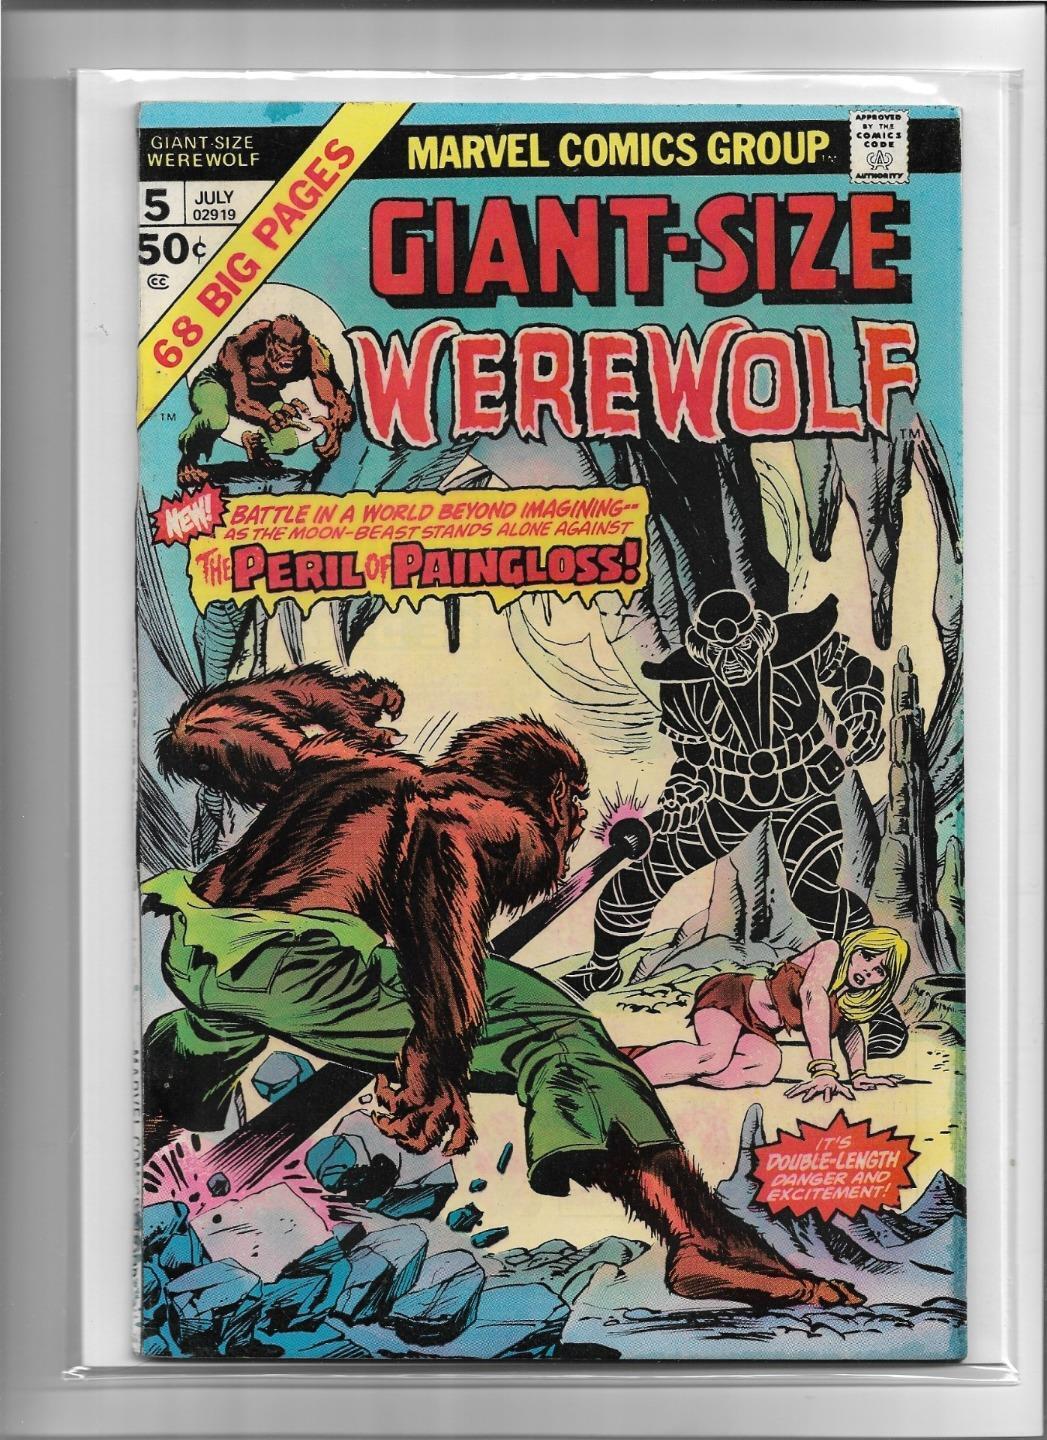 GIANT-SIZE WEREWOLF #5 1975 VERY GOOD- 3.5 4566 blue ink stains